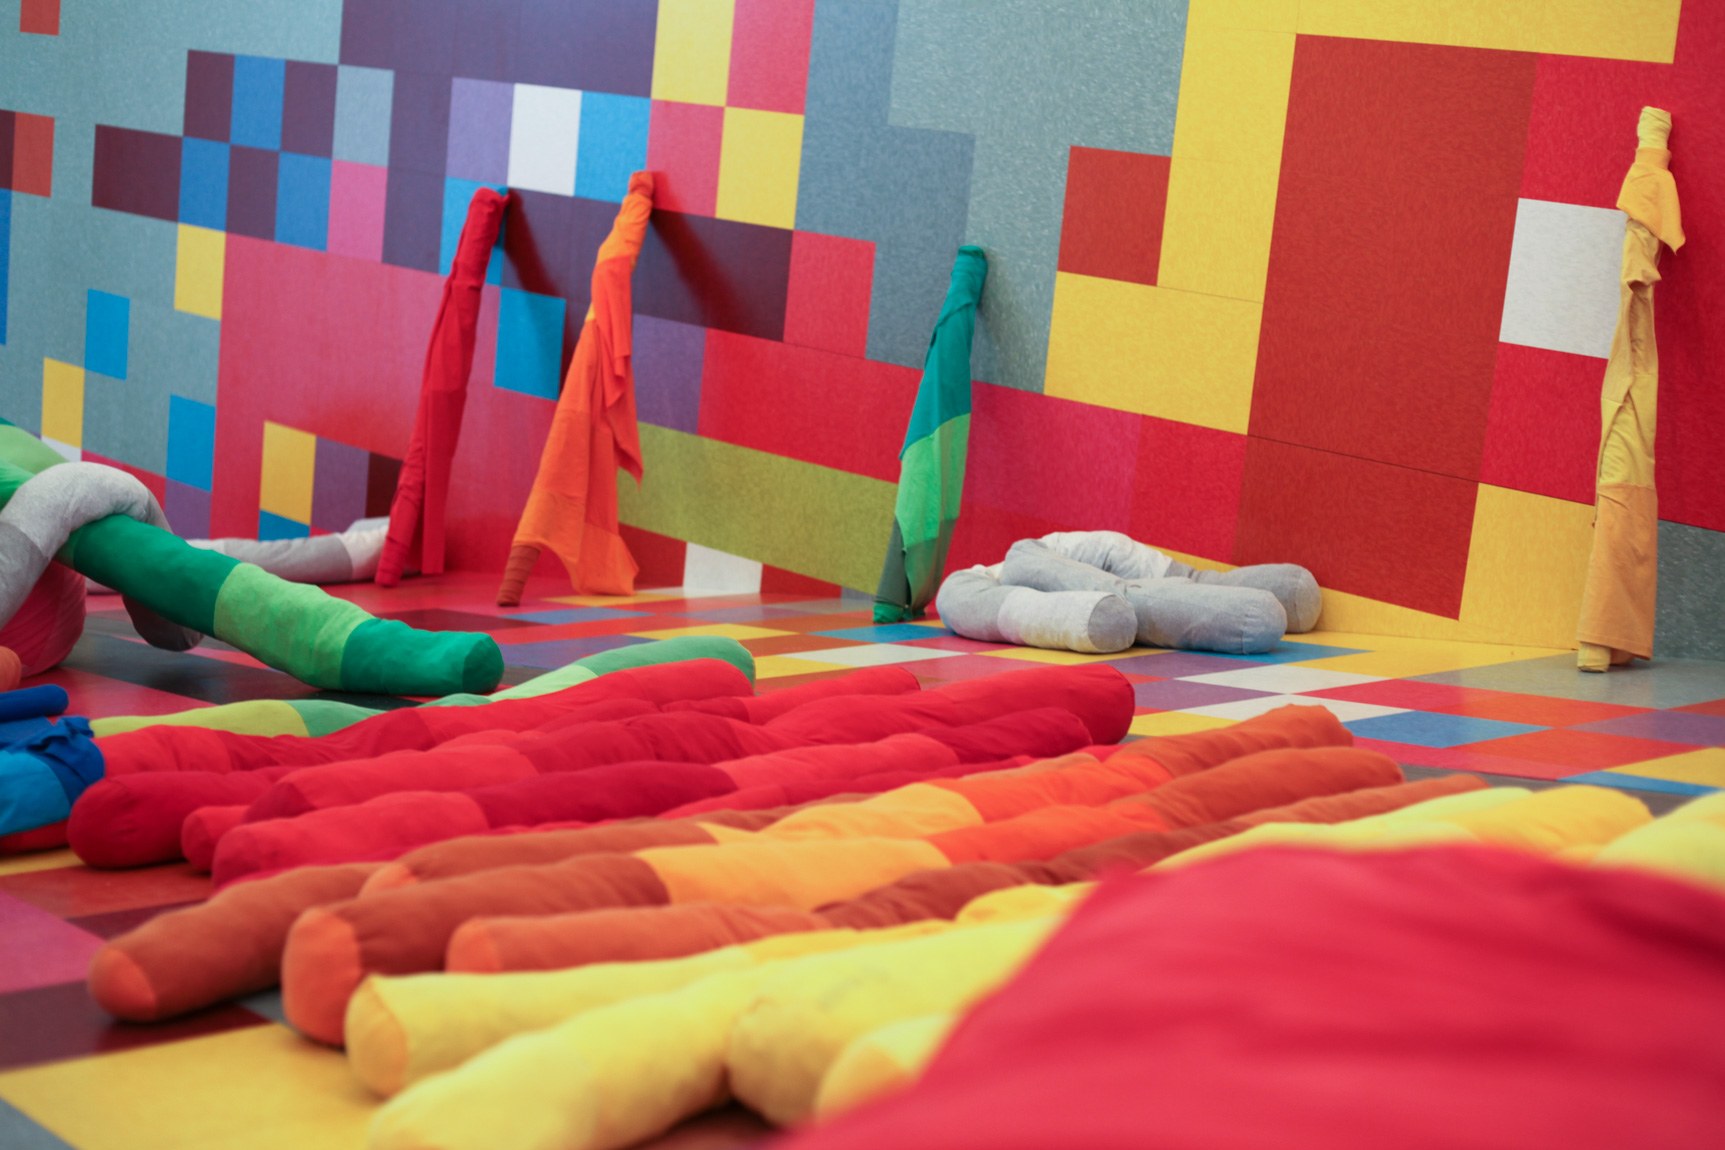 Long, thin colorful pillows lie on the floor of David Scanavino's installation "Candy Crush."